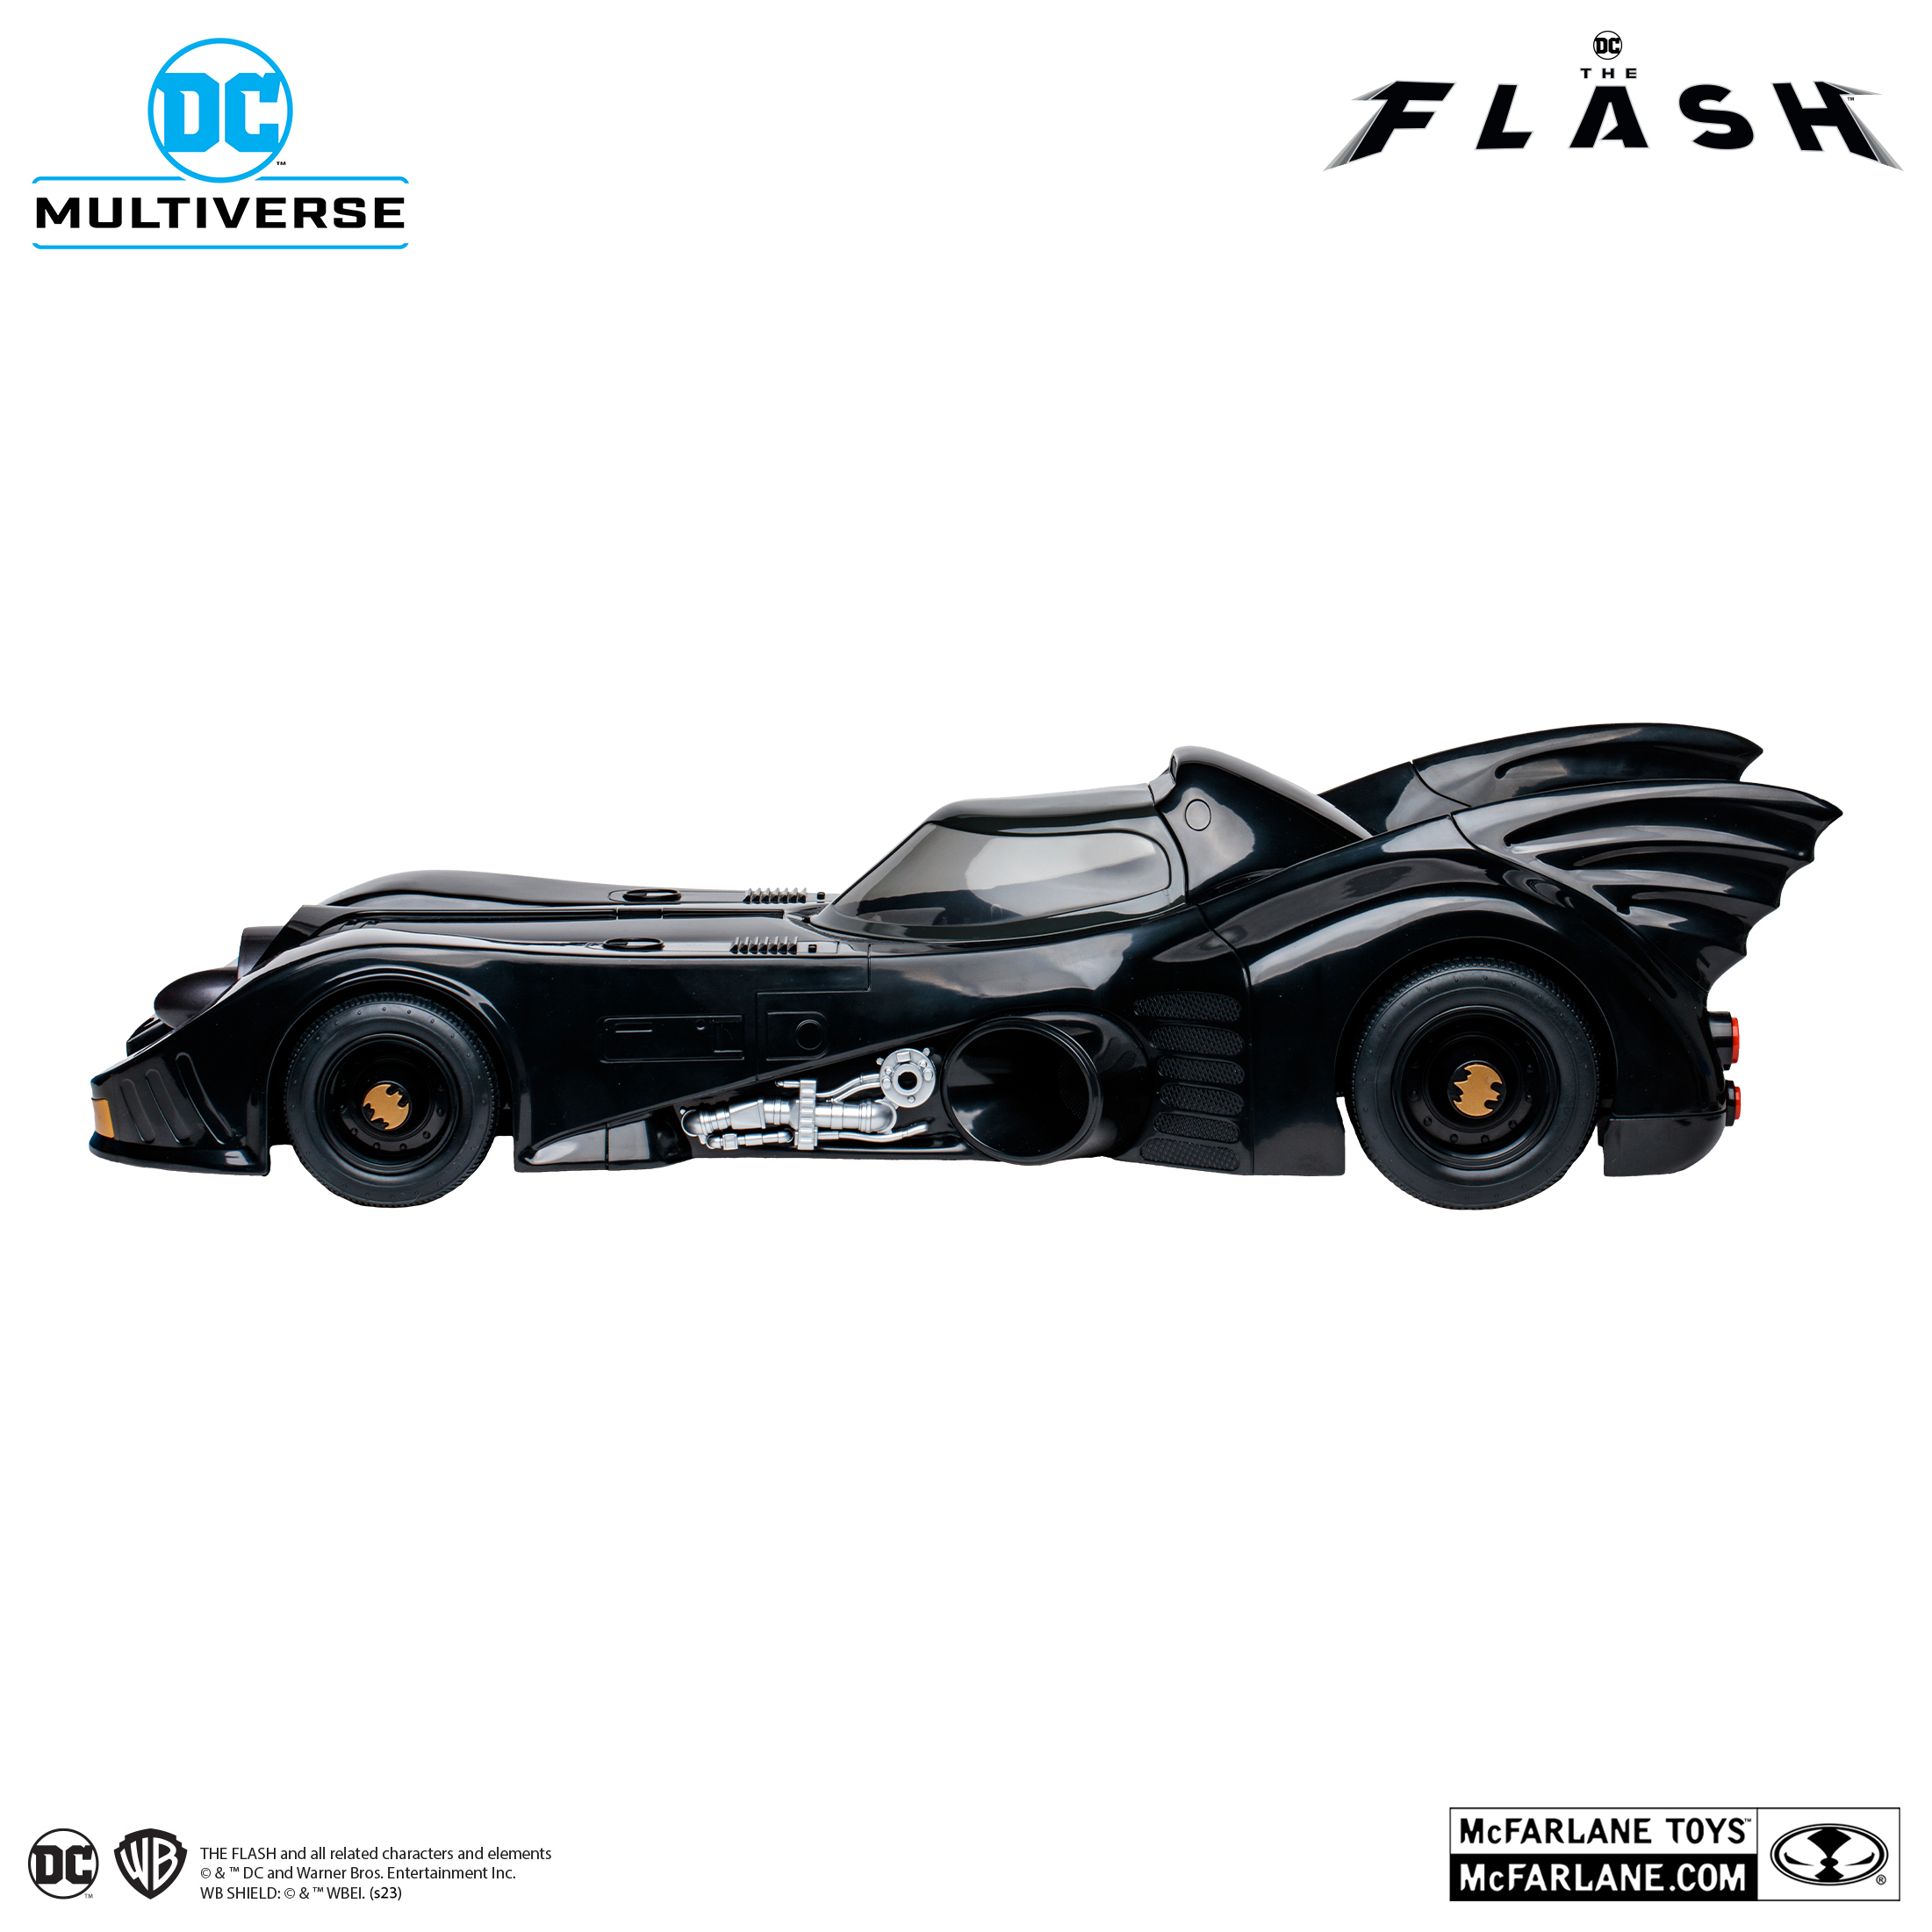 McFarlane Toys on X: Batman™ & Batmobile™ Gold Label 2pk pre-orders go  live TOMORROW exclusively at @. Based on the Batman™ movie from 1989.  *Limited quantities available. #McFarlaneToys #DCMultiverse #Batman # Batmobile #Batman89 #